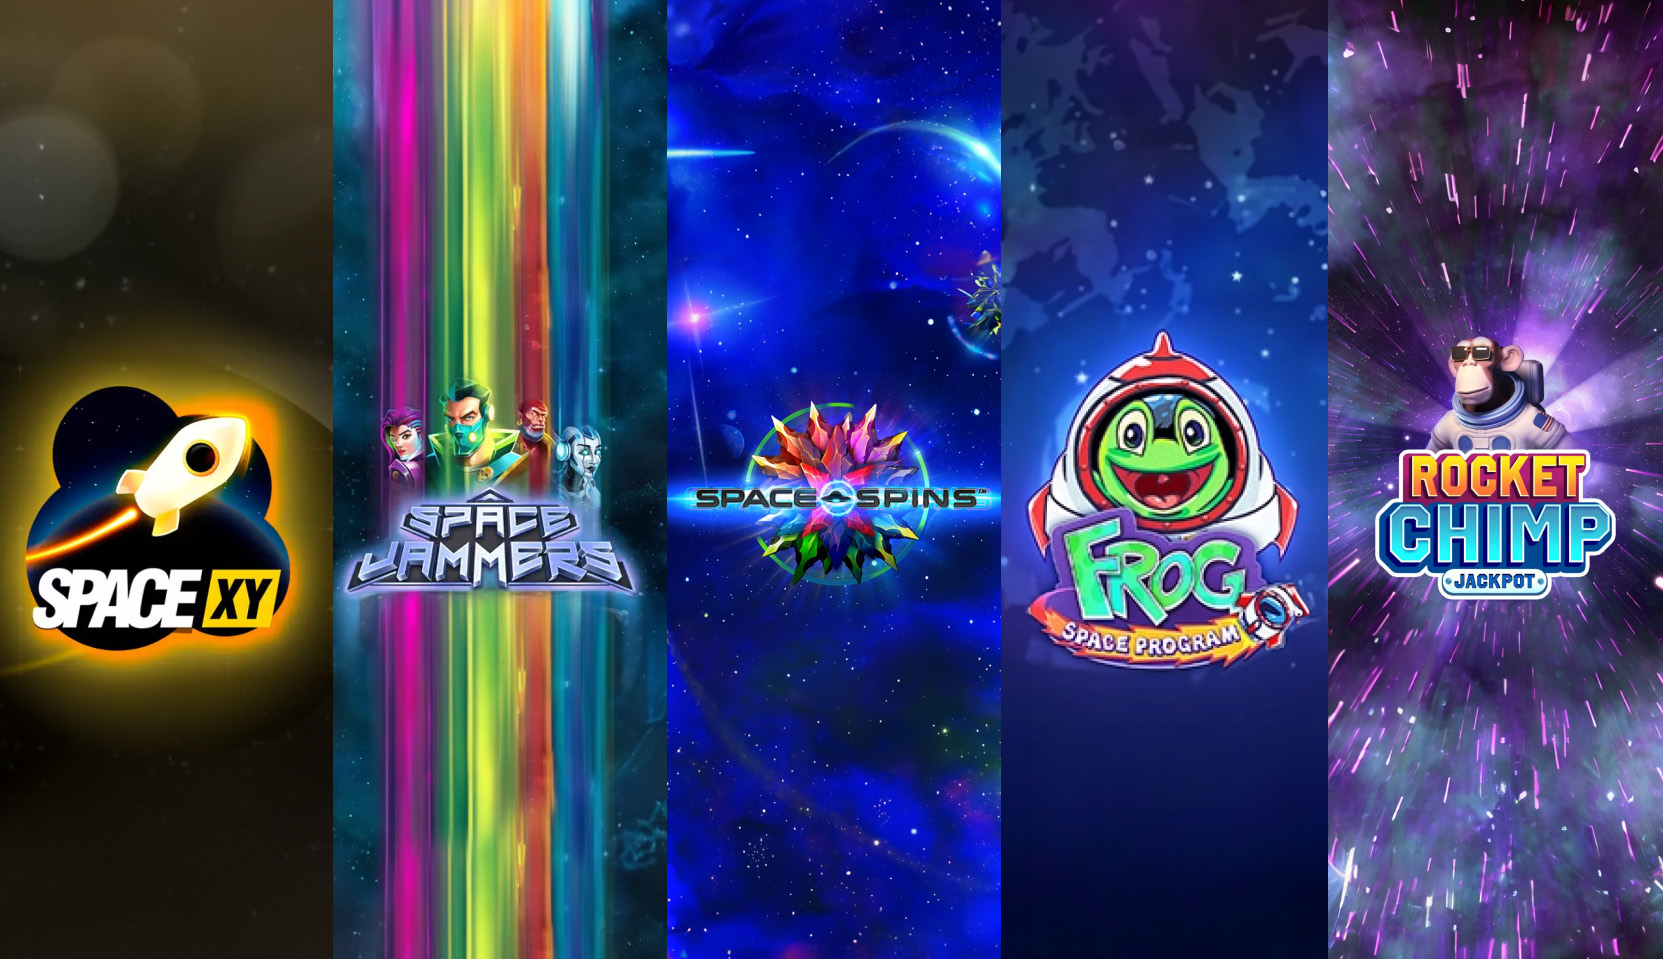 Collage of five space-themed slot games: Space XY, Space Jammers, Space Spins, Frog Space Program, Rocket Chimp slot games